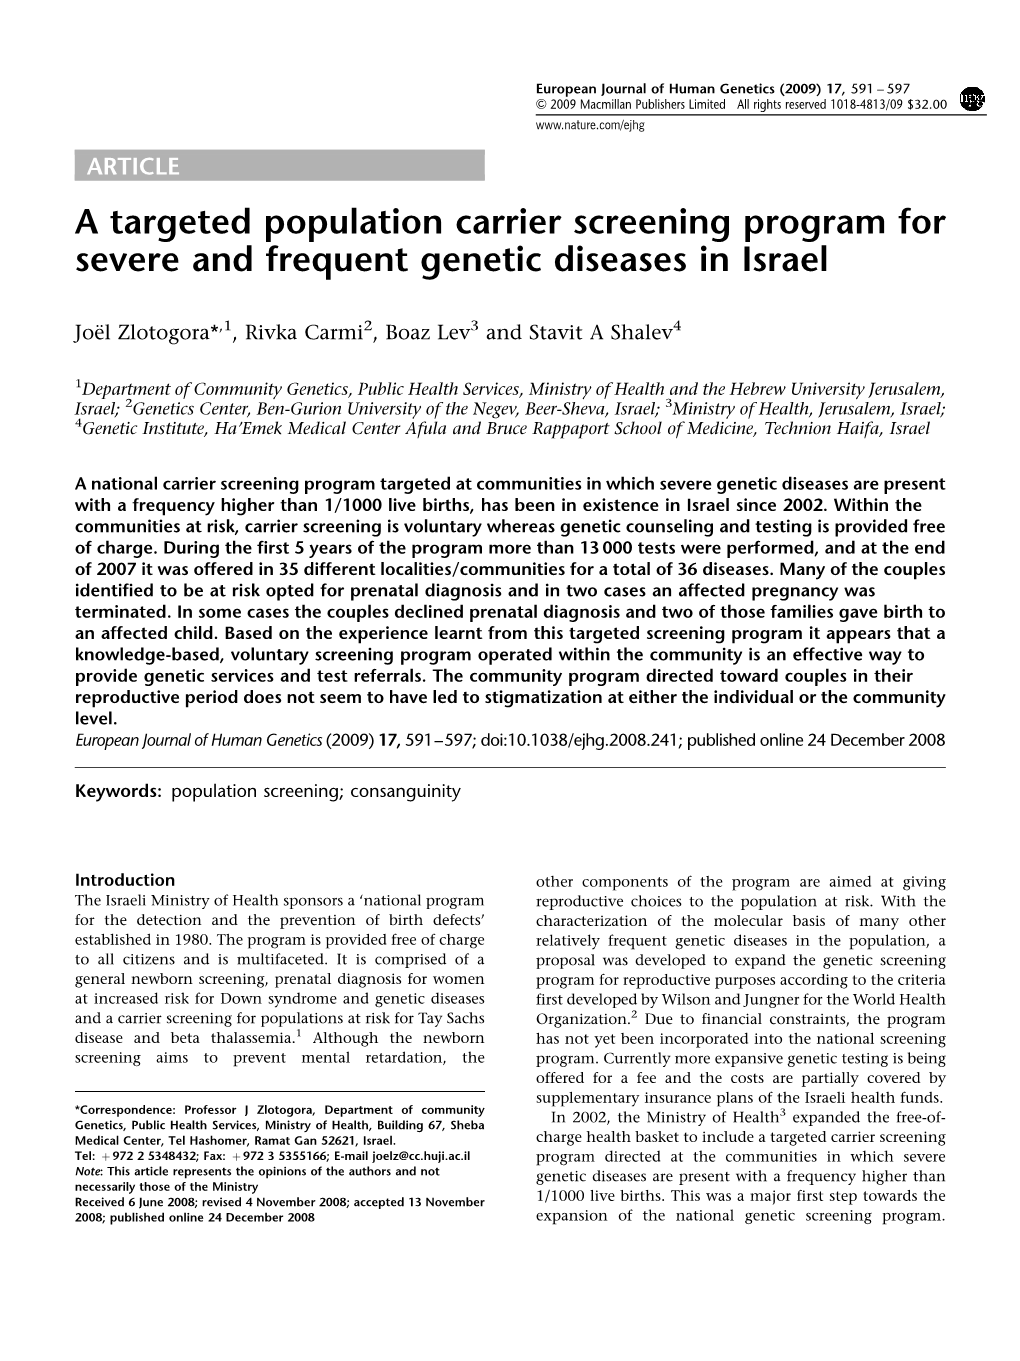 A Targeted Population Carrier Screening Program for Severe and Frequent Genetic Diseases in Israel